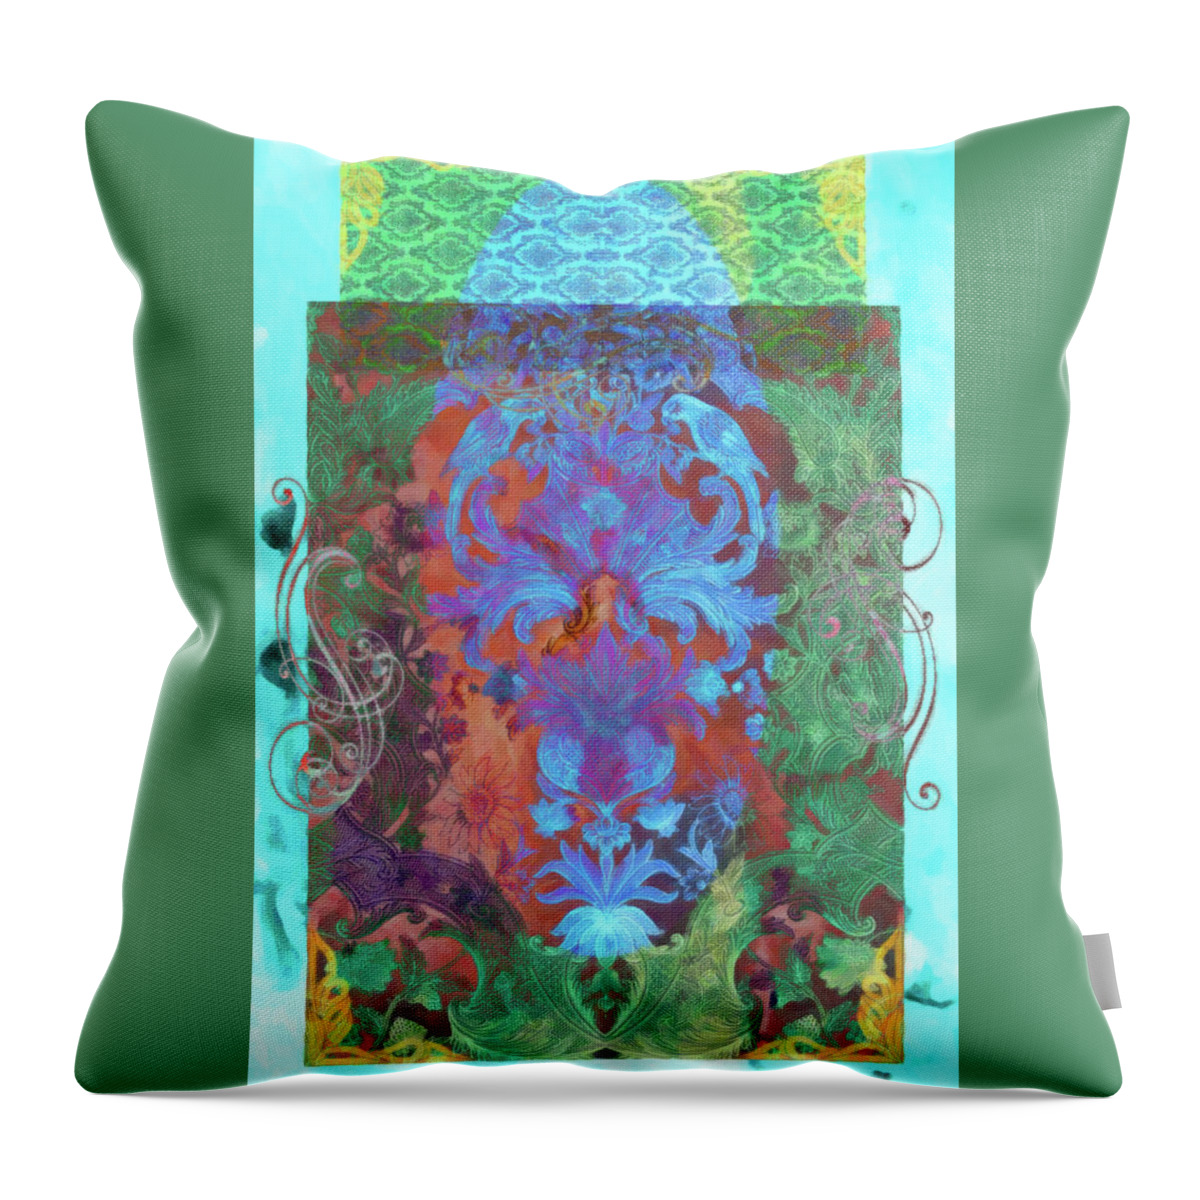 Design Throw Pillow featuring the mixed media Flourish 5 by Priscilla Huber